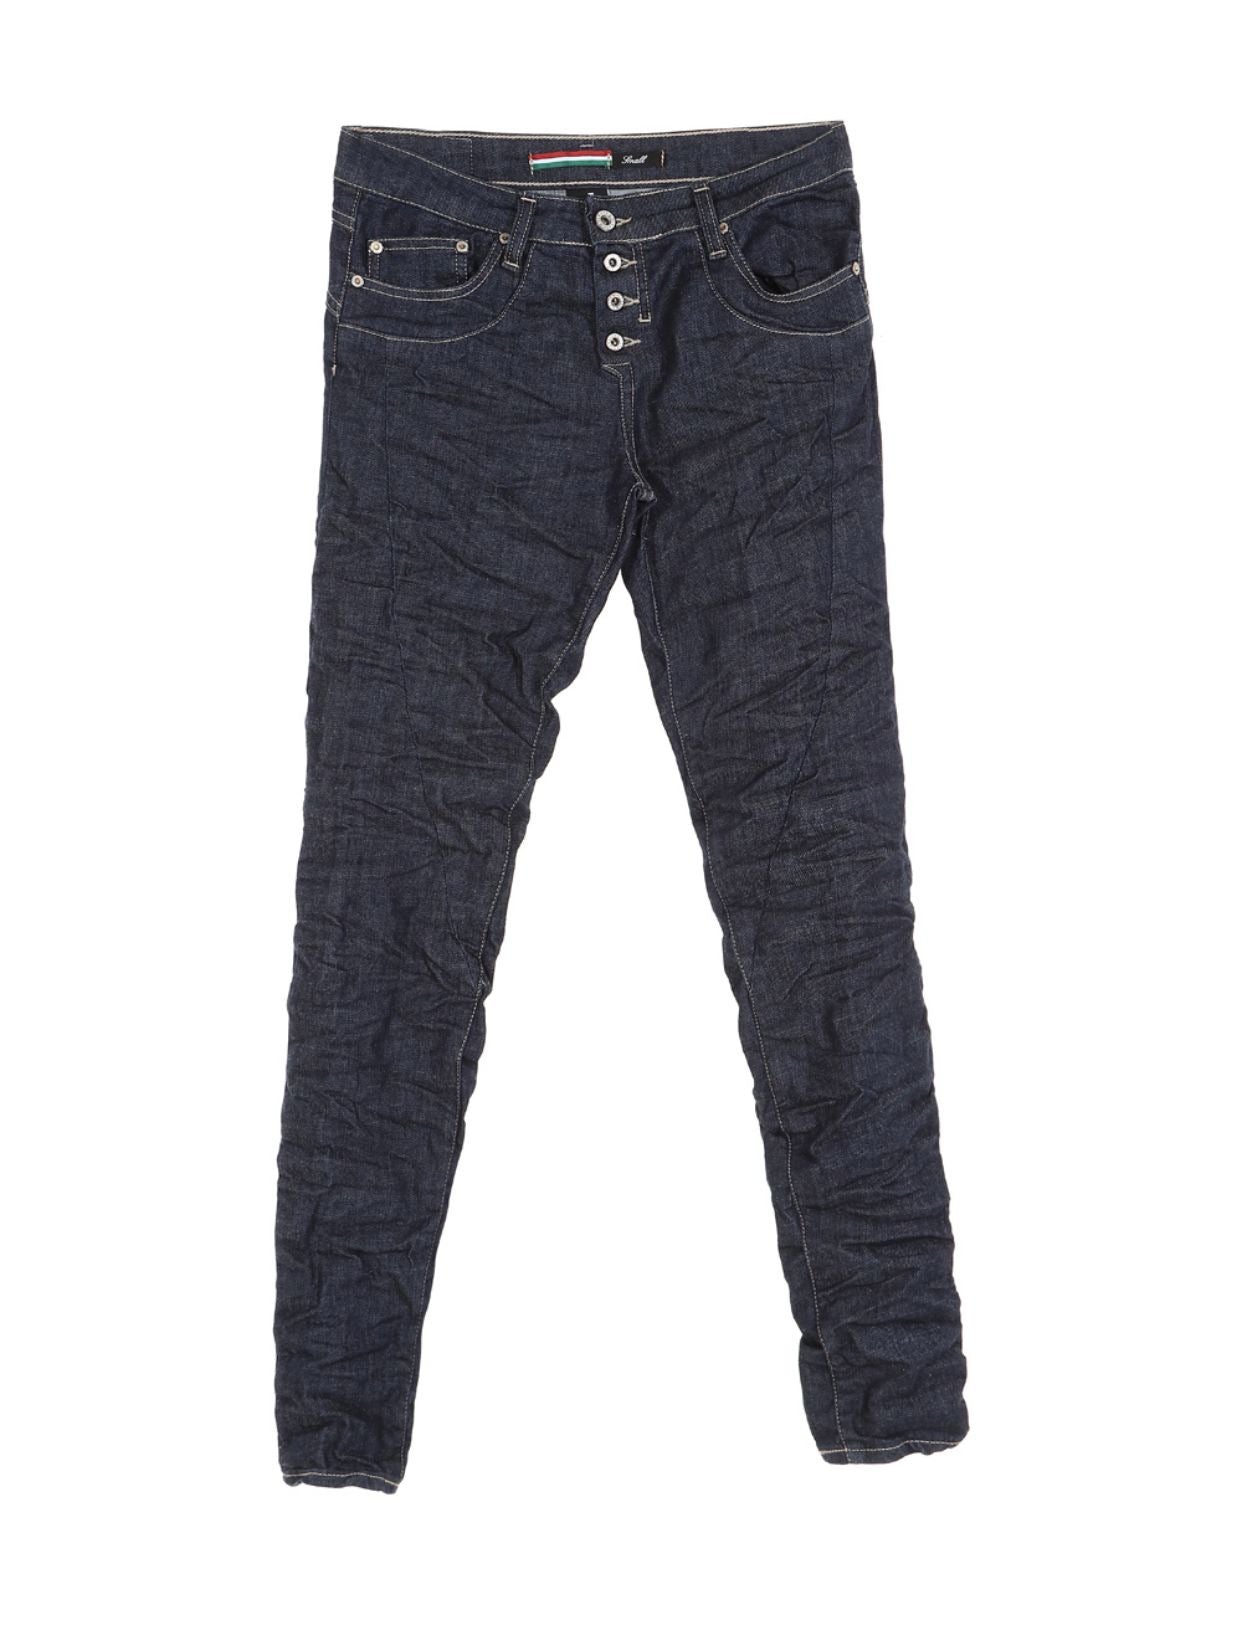 Imperial Italy Imperial Italy Blue Denim Jeans